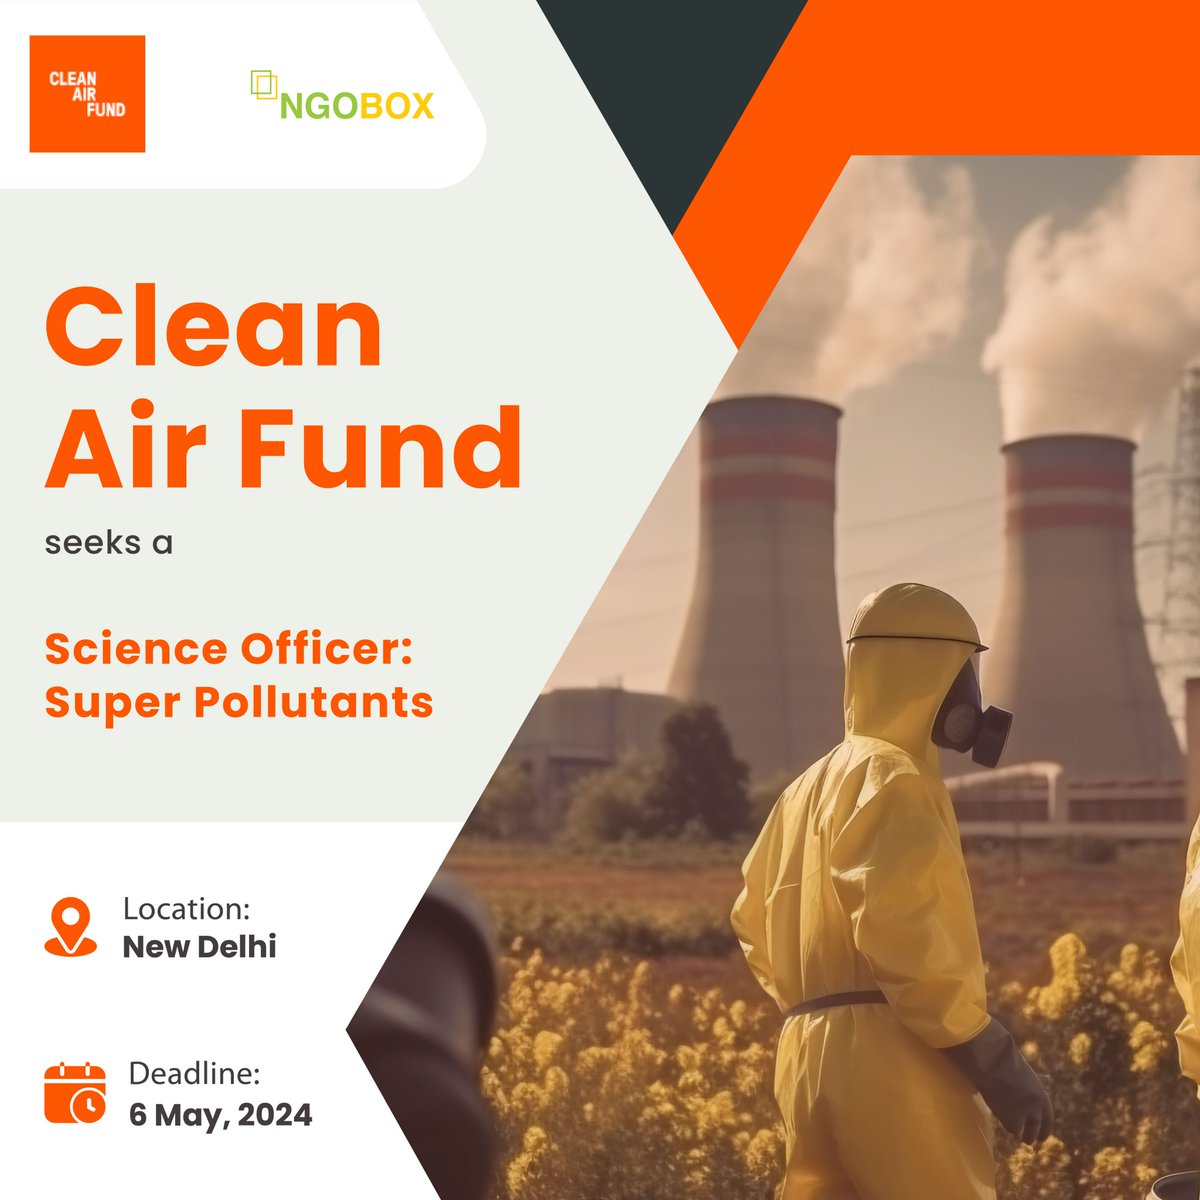 #JobOpening Clean Air Fund is looking for a Science Officer specializing in Super Pollutants. If you have a passion for creating a better world and possess superb attention to detail and strong communication skills, this role might be for you. ngobox.org/job-detail_Sci…